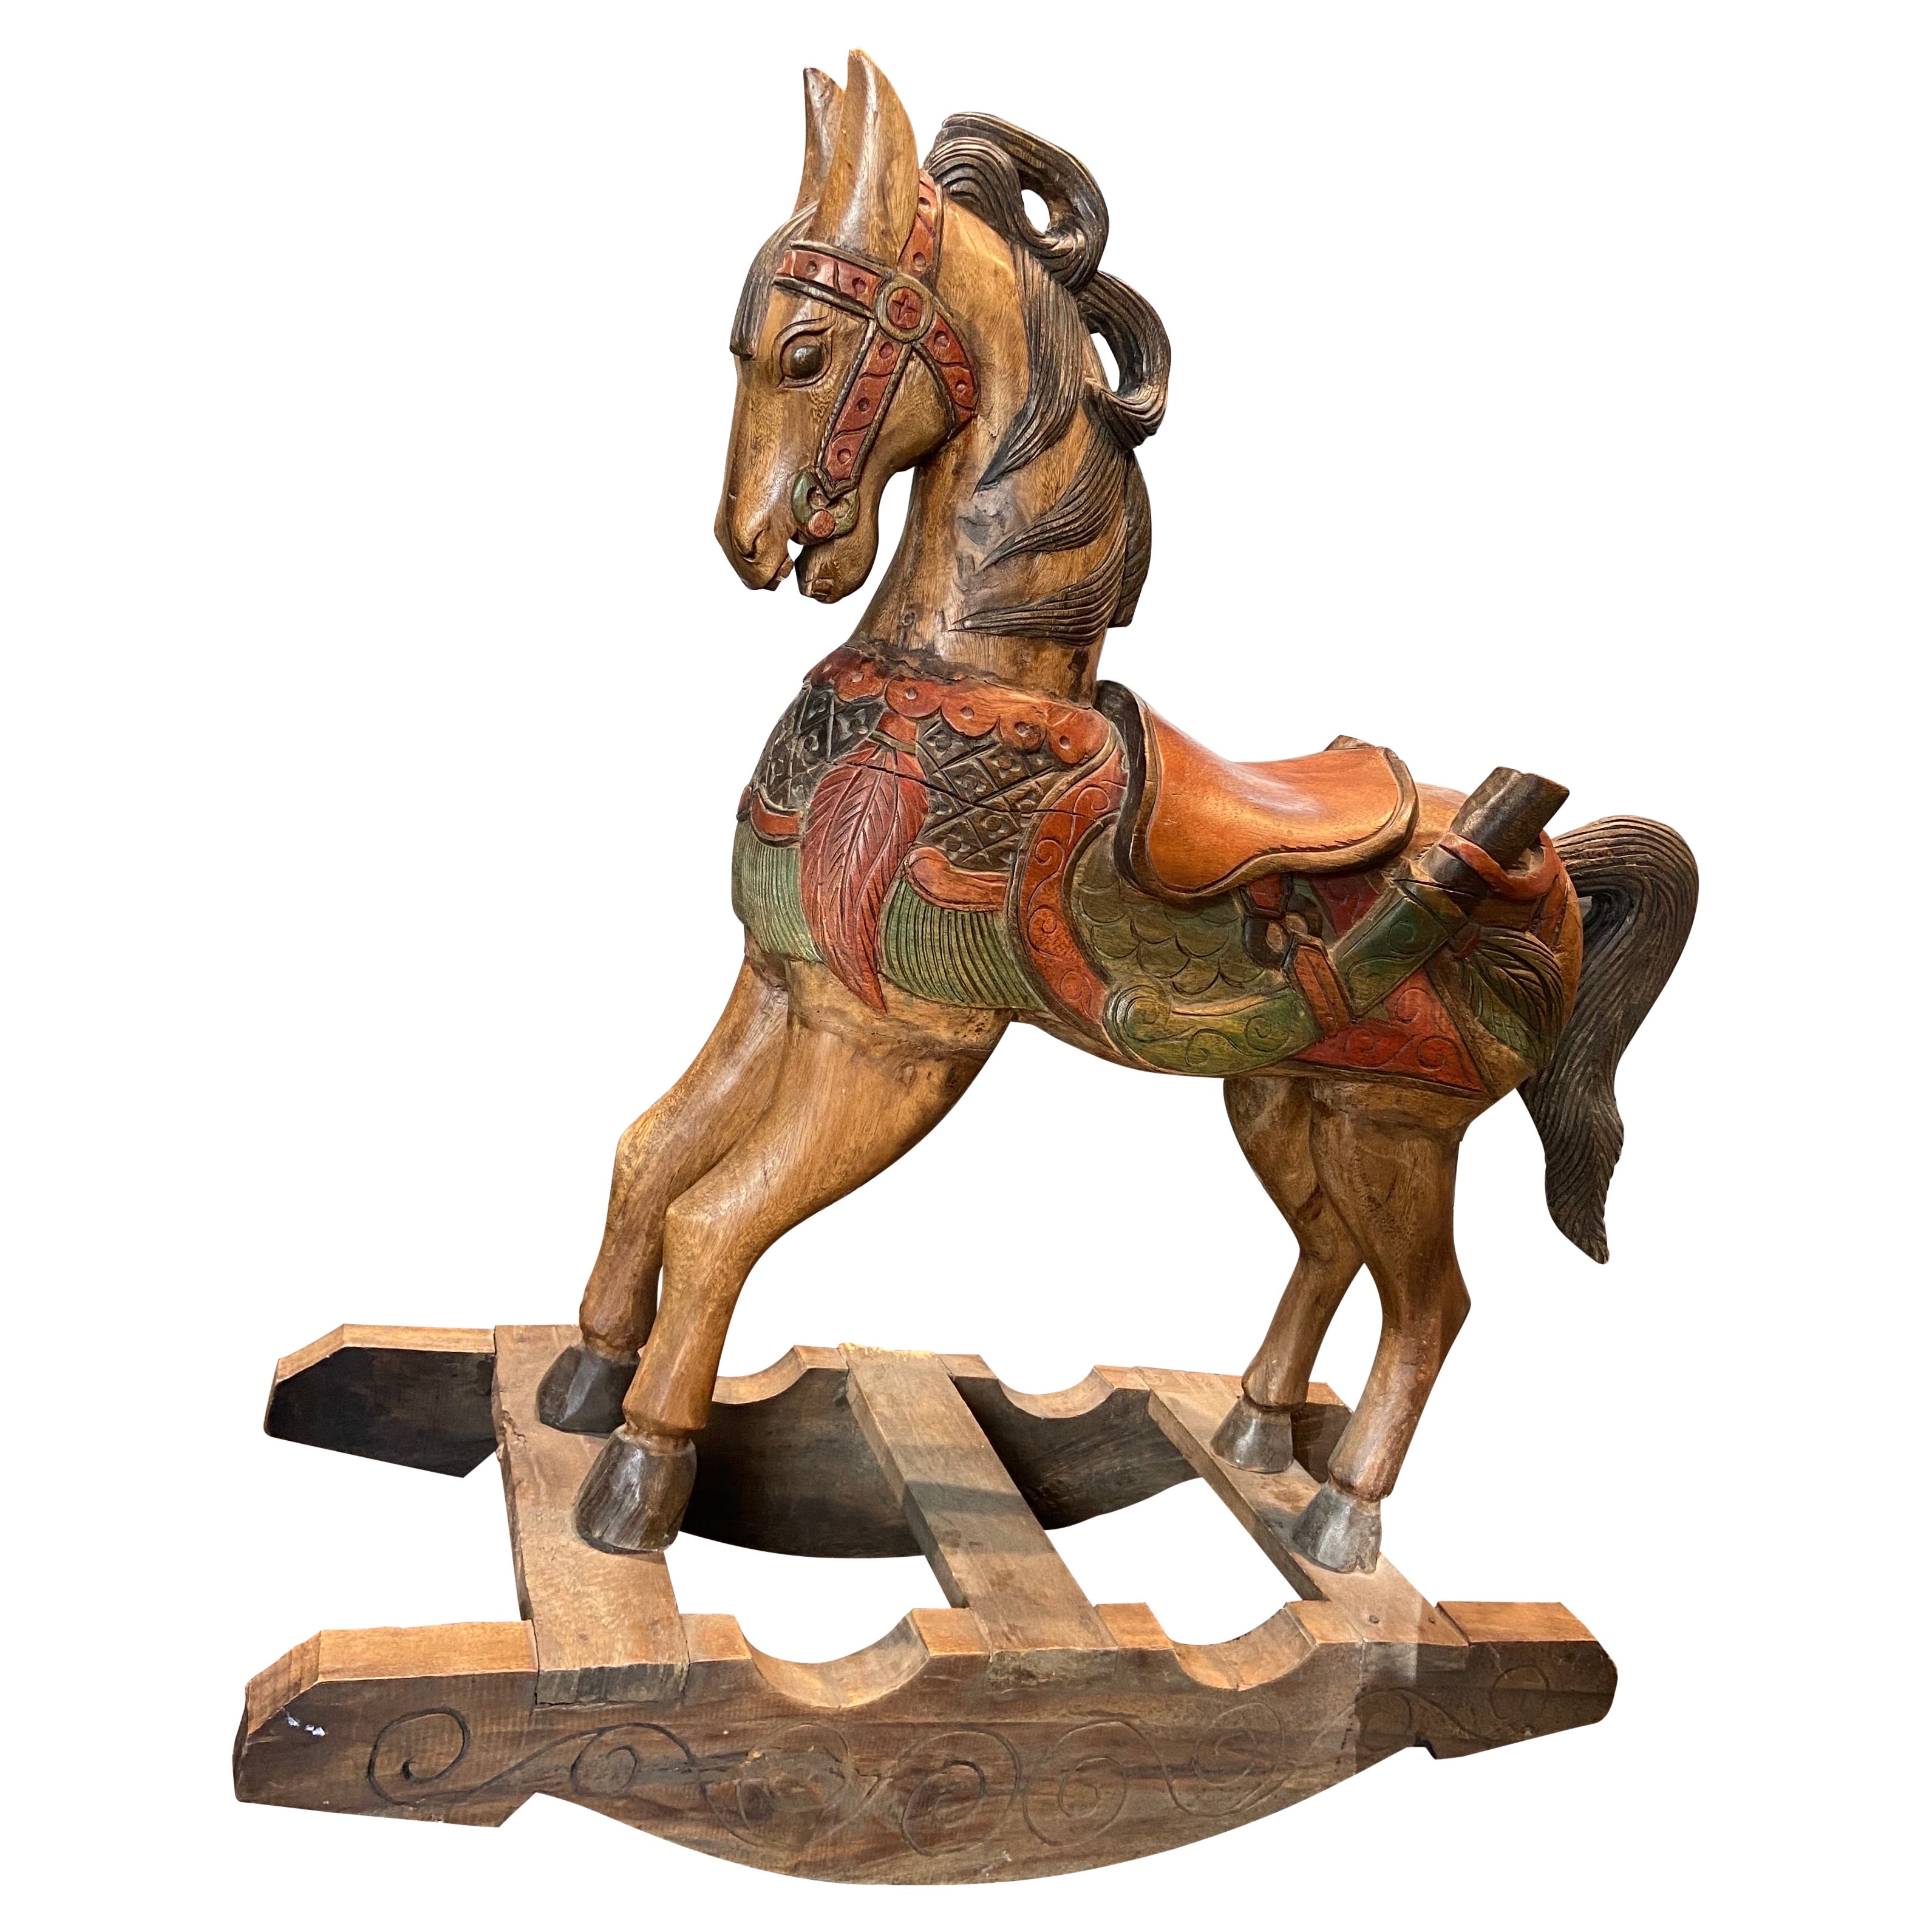 20th Century Belgium Wooden Hand Carved and Hand Painted Child's Rocking Horse